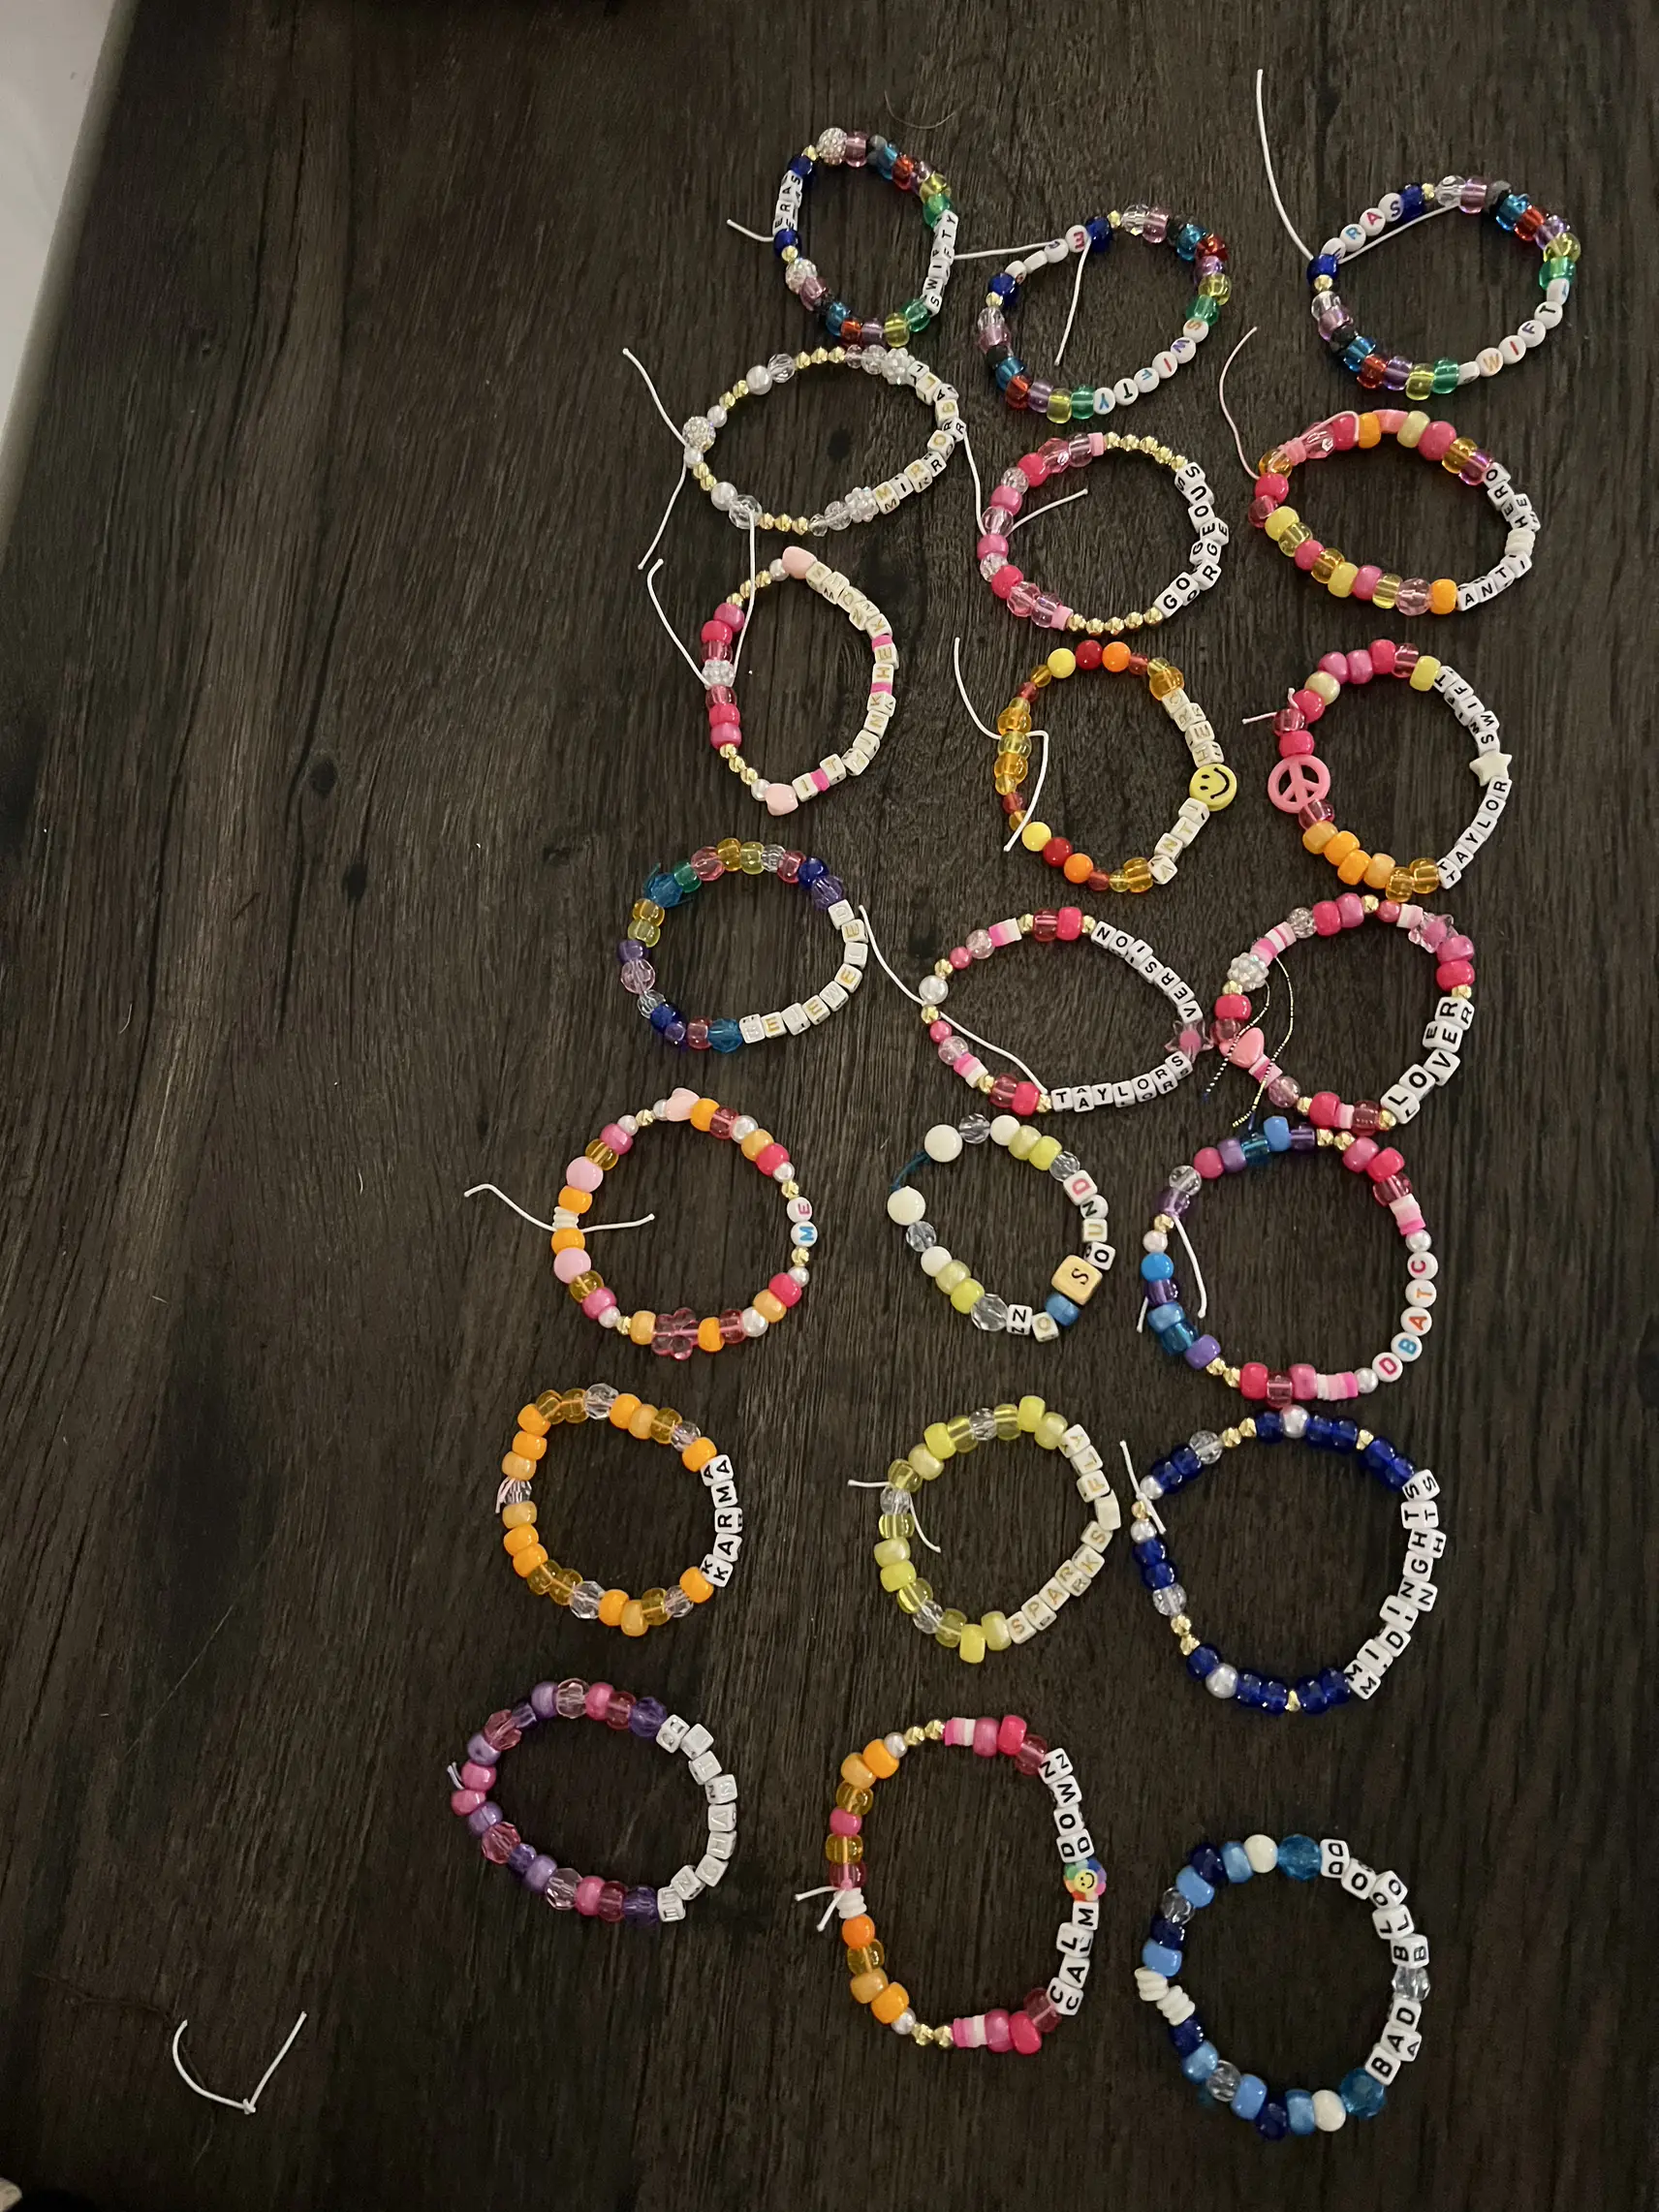 Taylor Swift Eras Tour Friendship Bracelets  Taylor swift birthday party  ideas, Clay beads, Taylor swift concert